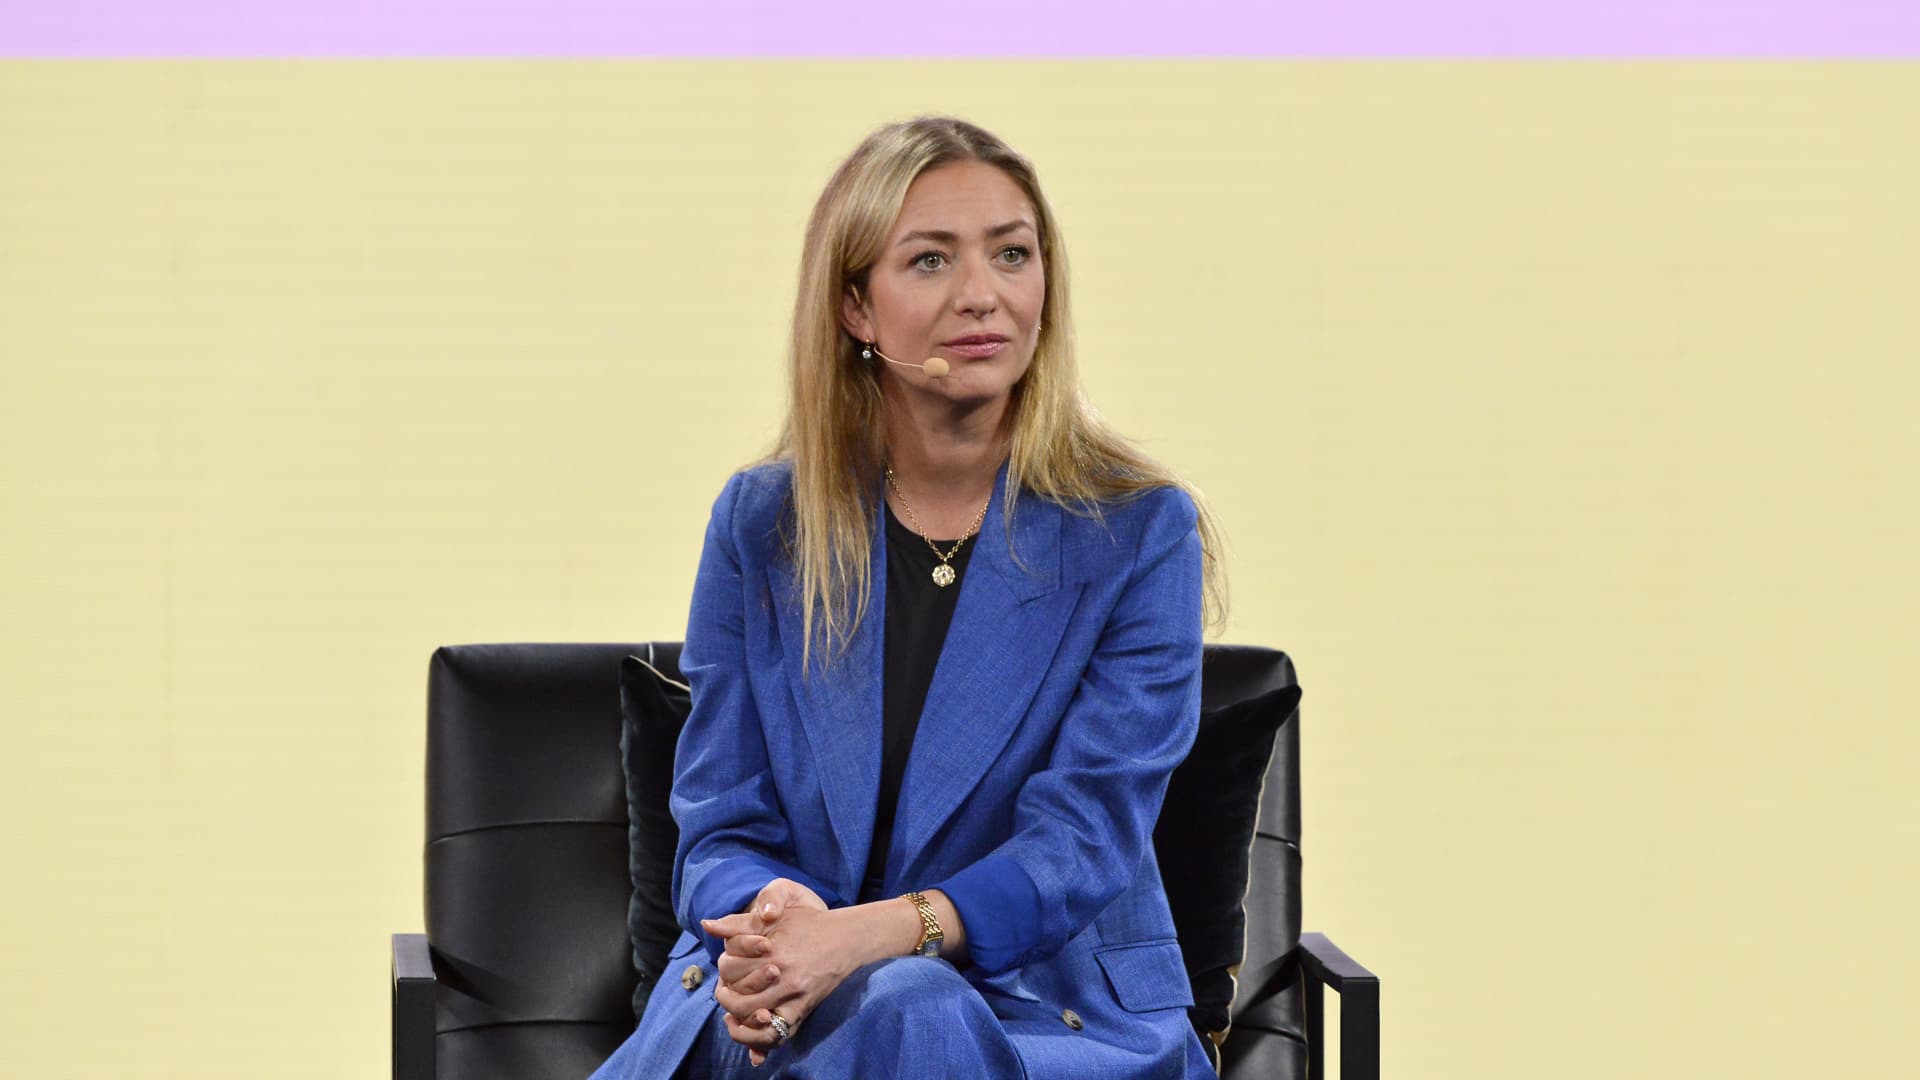 Bumble founder and CEO Whitney Wolfe Herd to step down